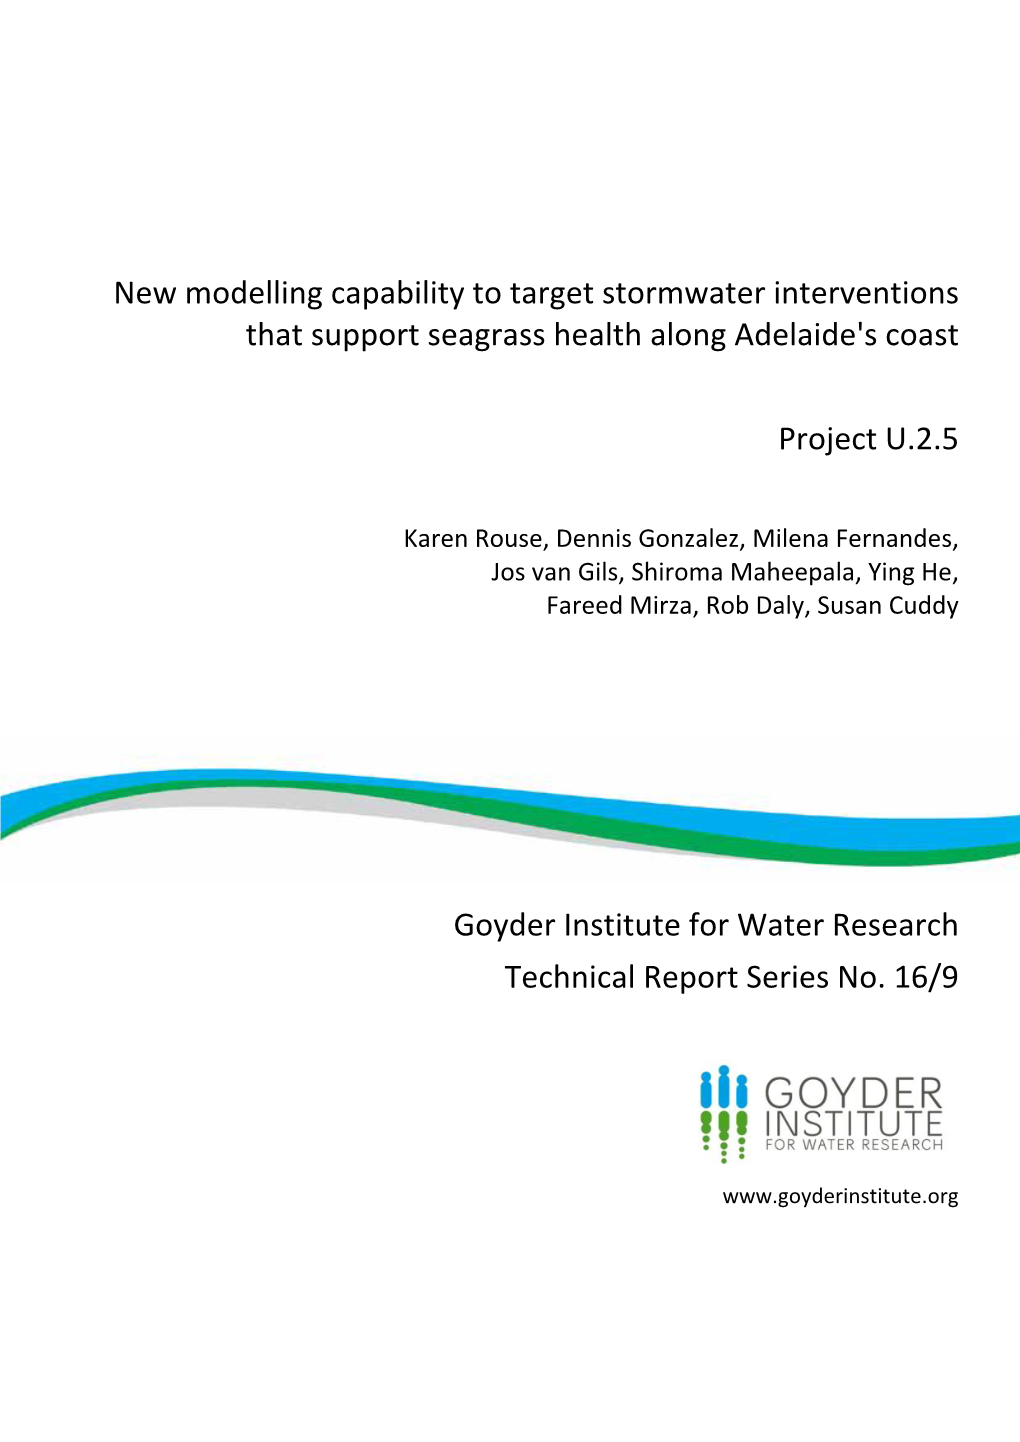 U.2.5 New Modelling Capability to Target Stormwater Interventions That Support Seagrass Health Along Adelaide's Coast | I